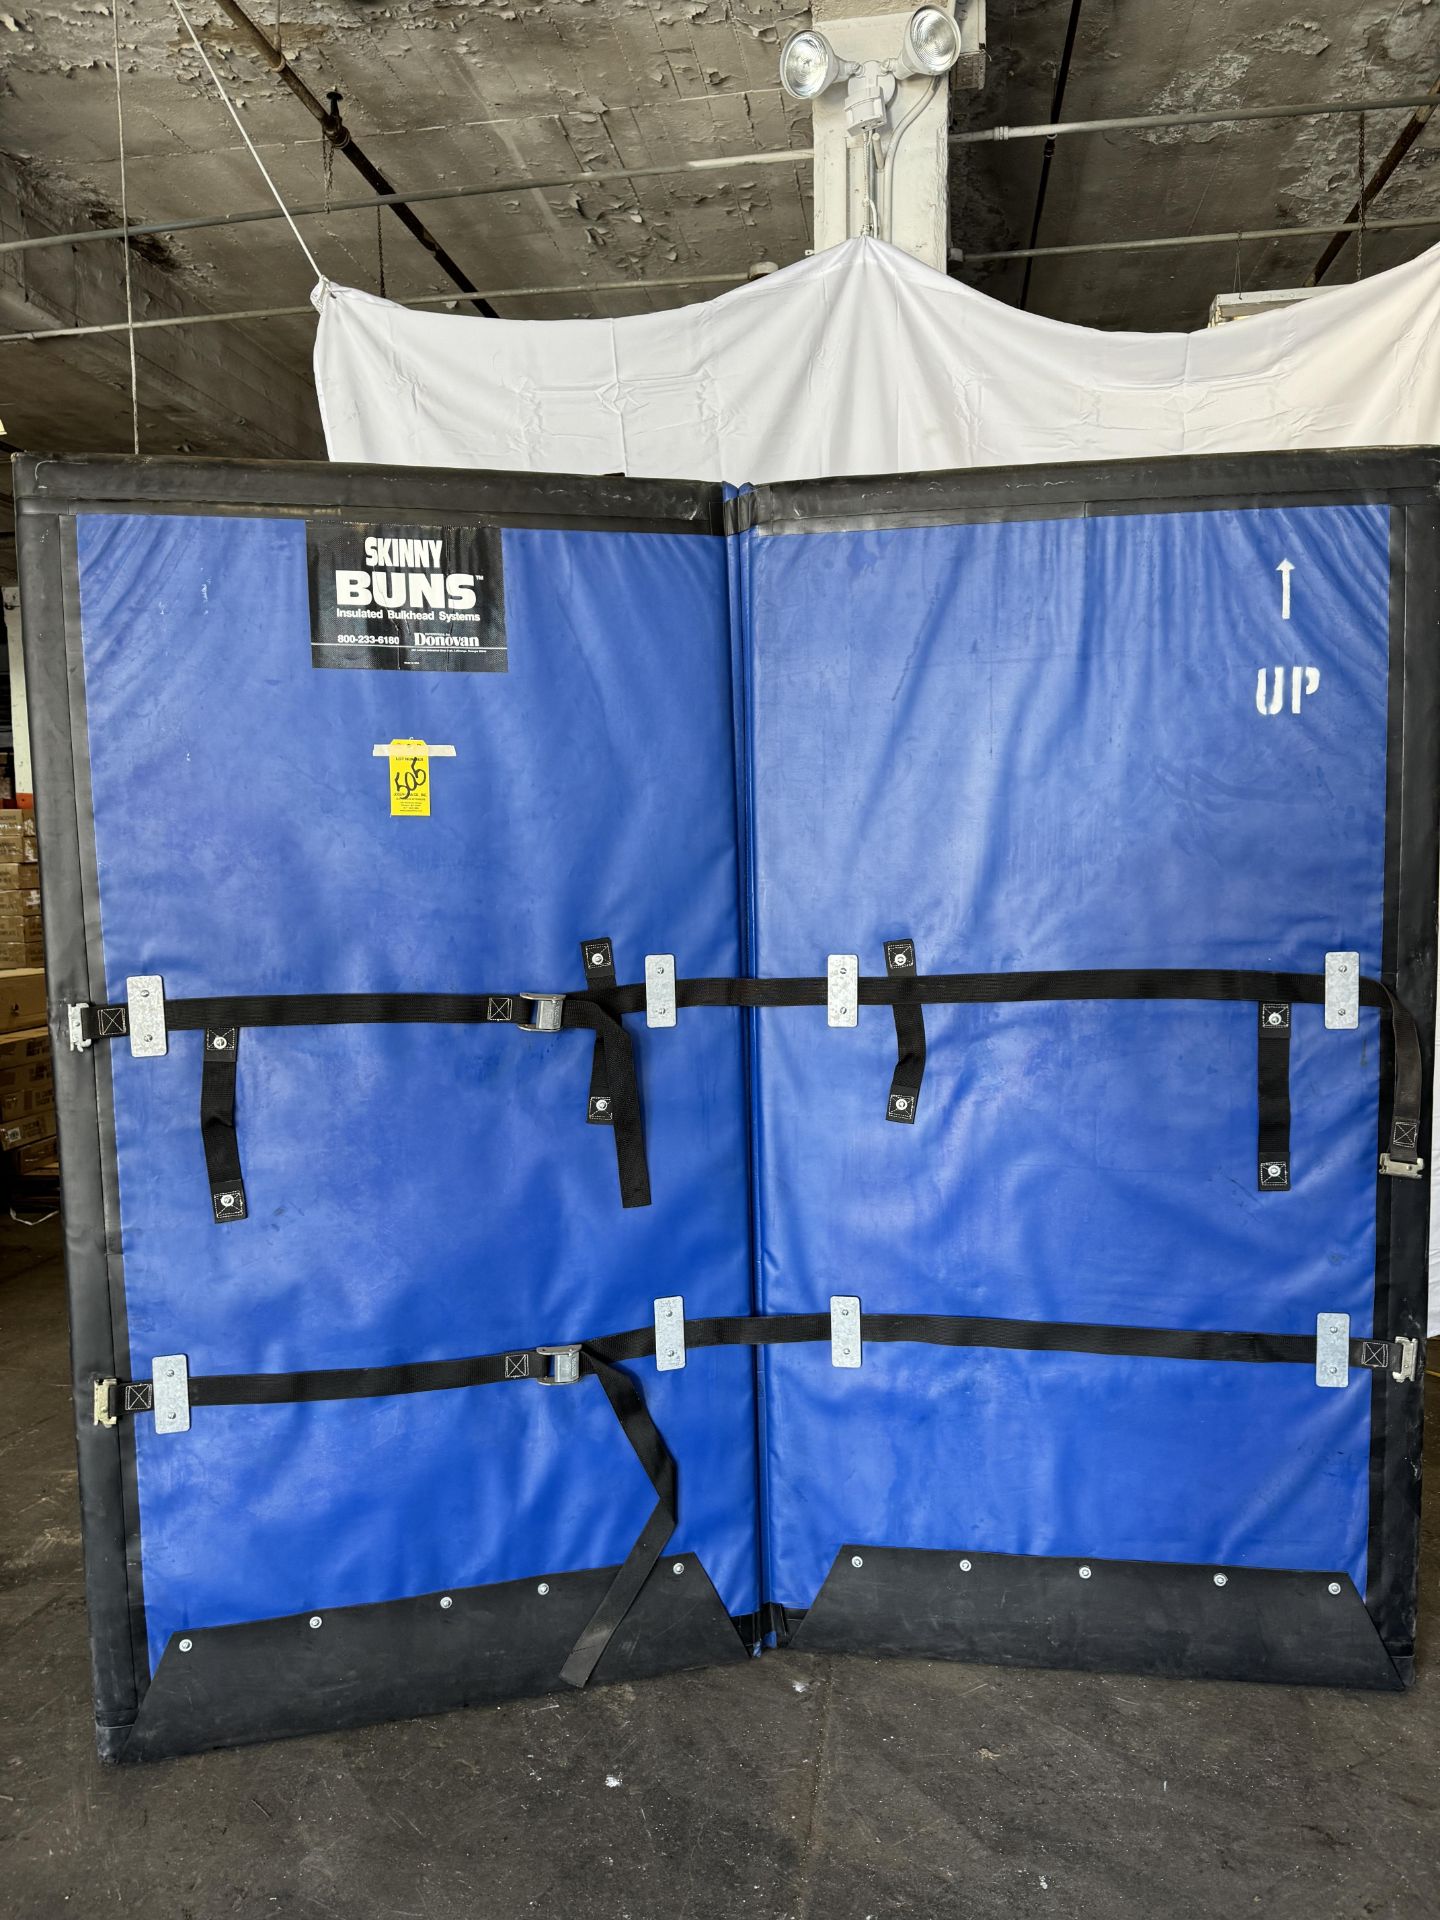 (1) Skinny Buns Insulated Bulkhead for Refrigerated Trucks, (2) Panel, 82" H x 44" W Per Panel